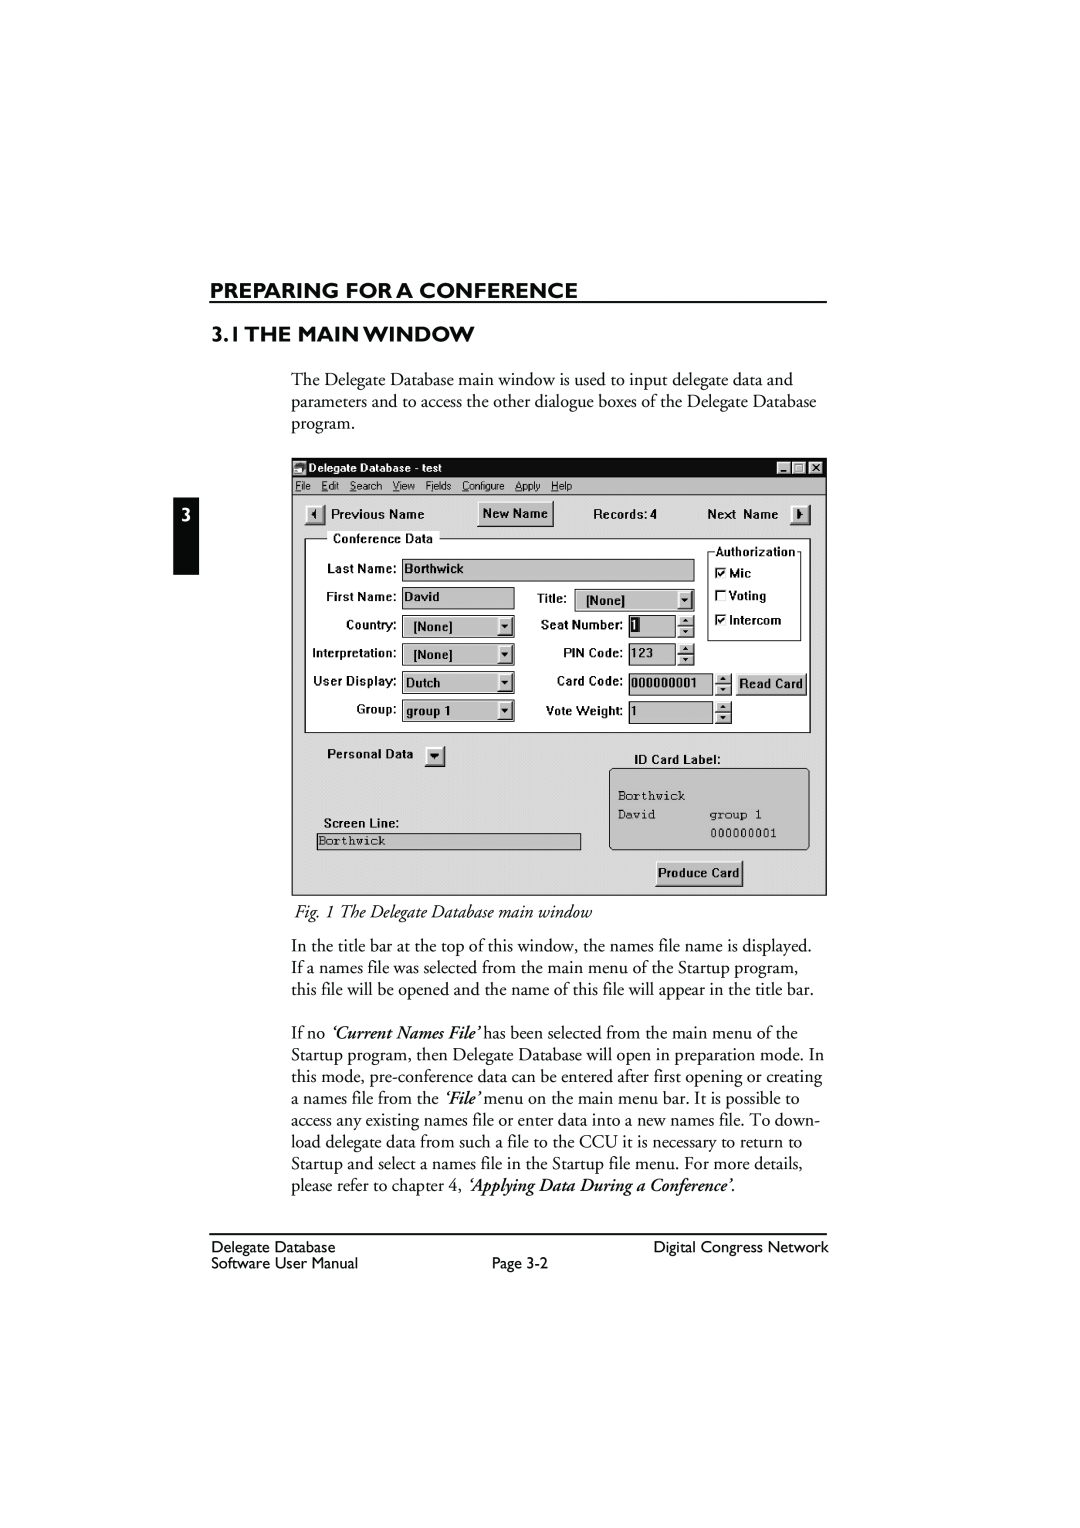 Bosch Appliances LBB3580 user manual PREPARING FOR A CONFERENCE 3.1 THE MAIN WINDOW, The Delegate Database main window 